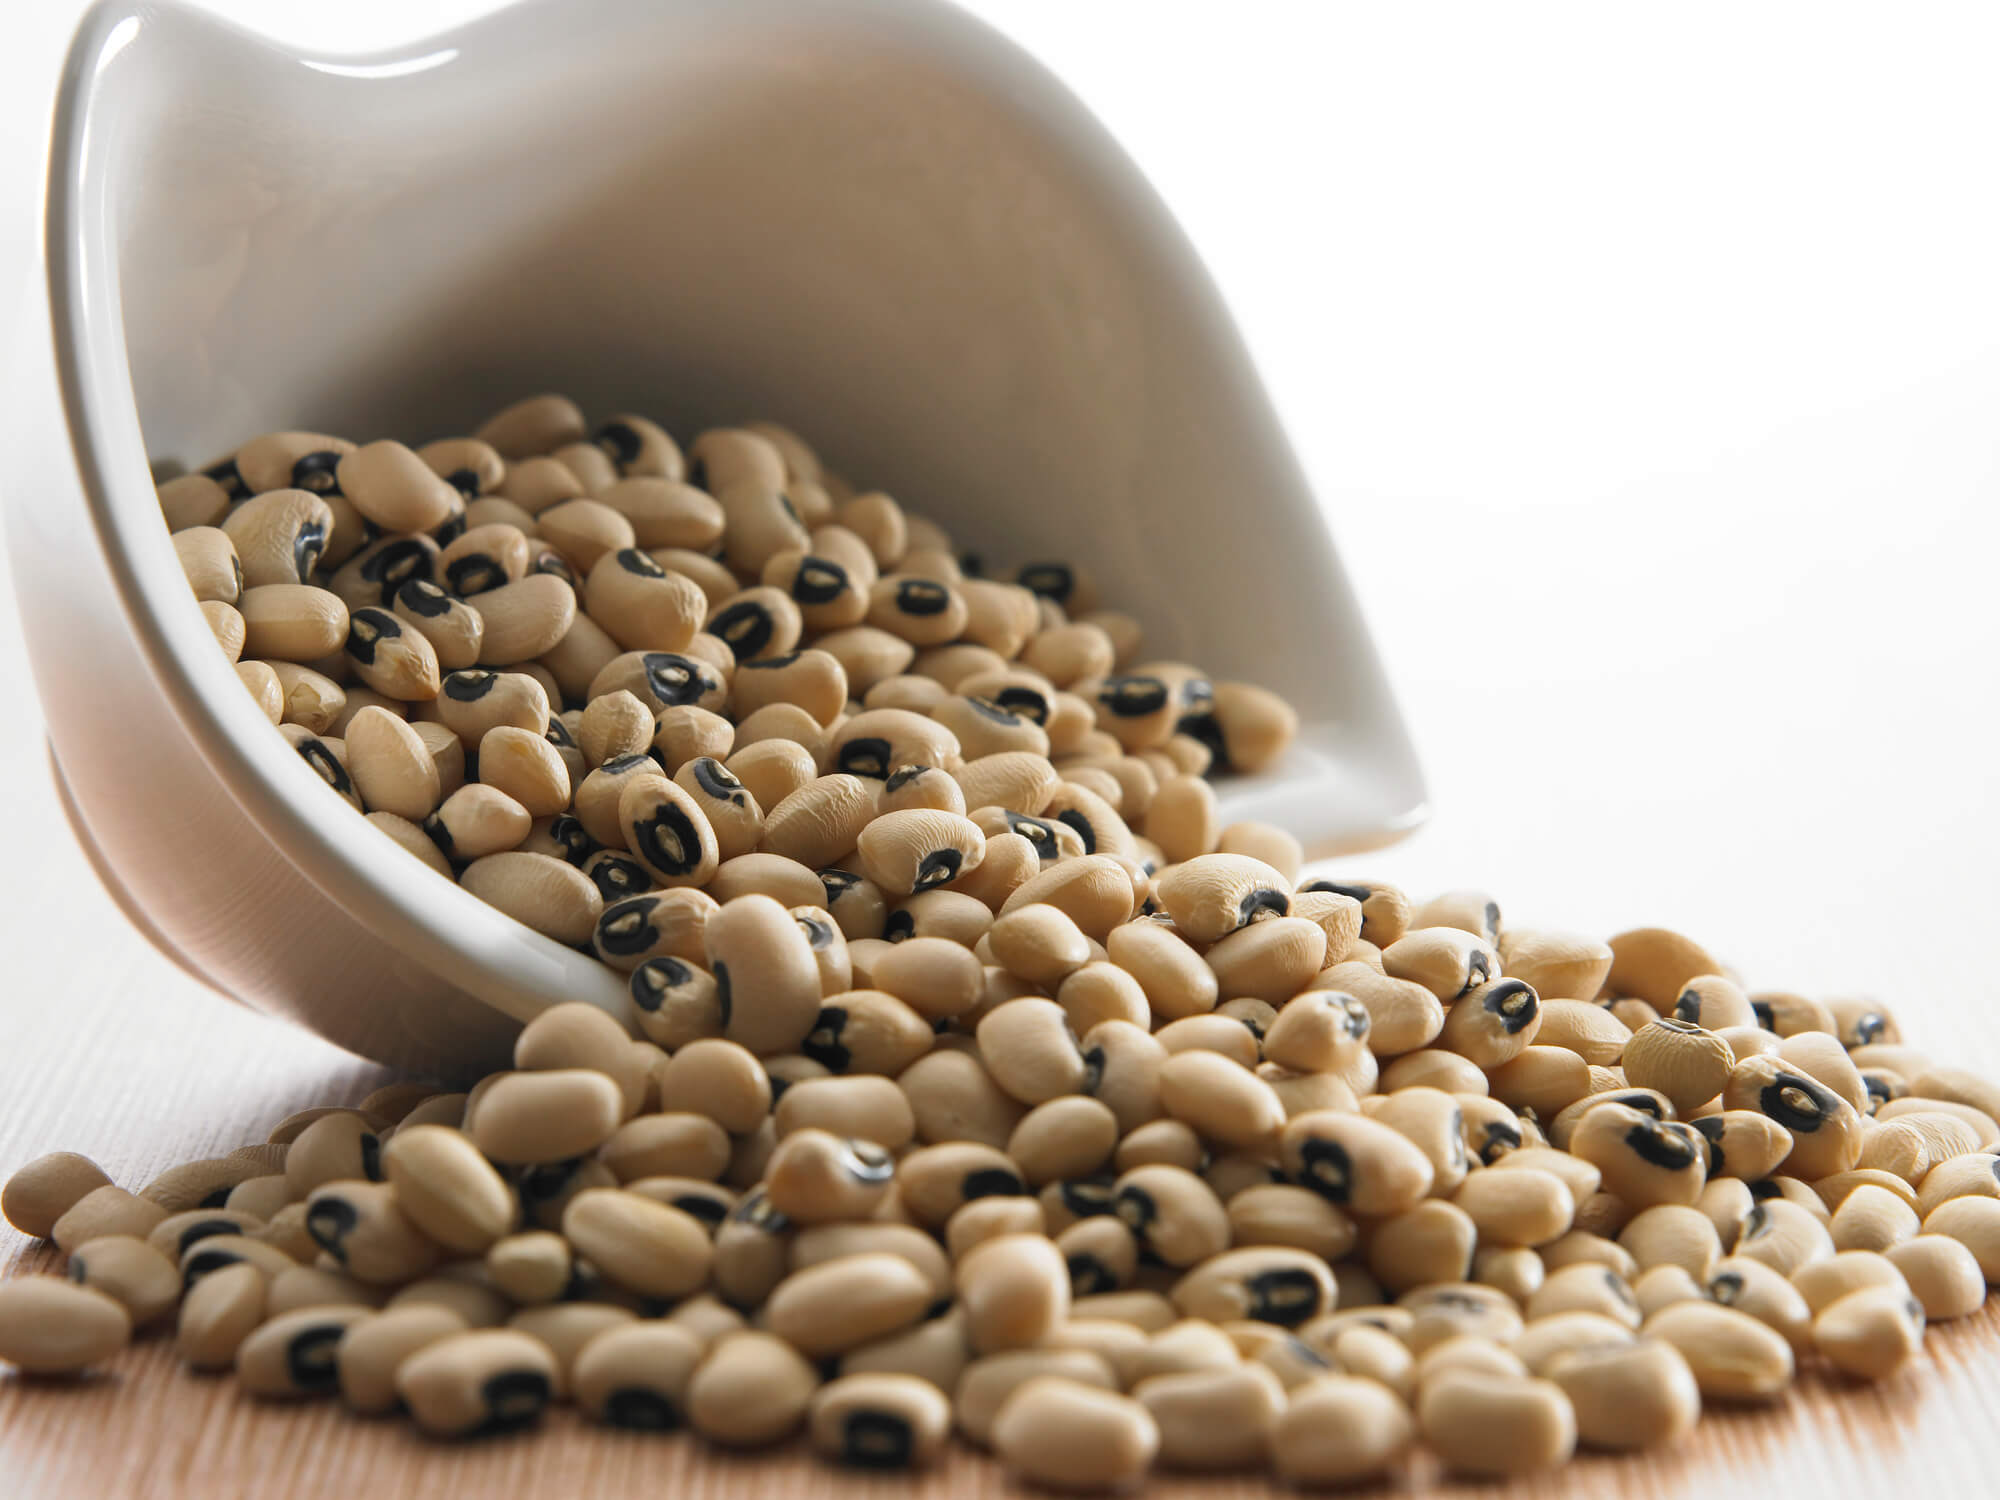 Close-Up Of Black-Eyed Peas In Bowl On Table Against White Background